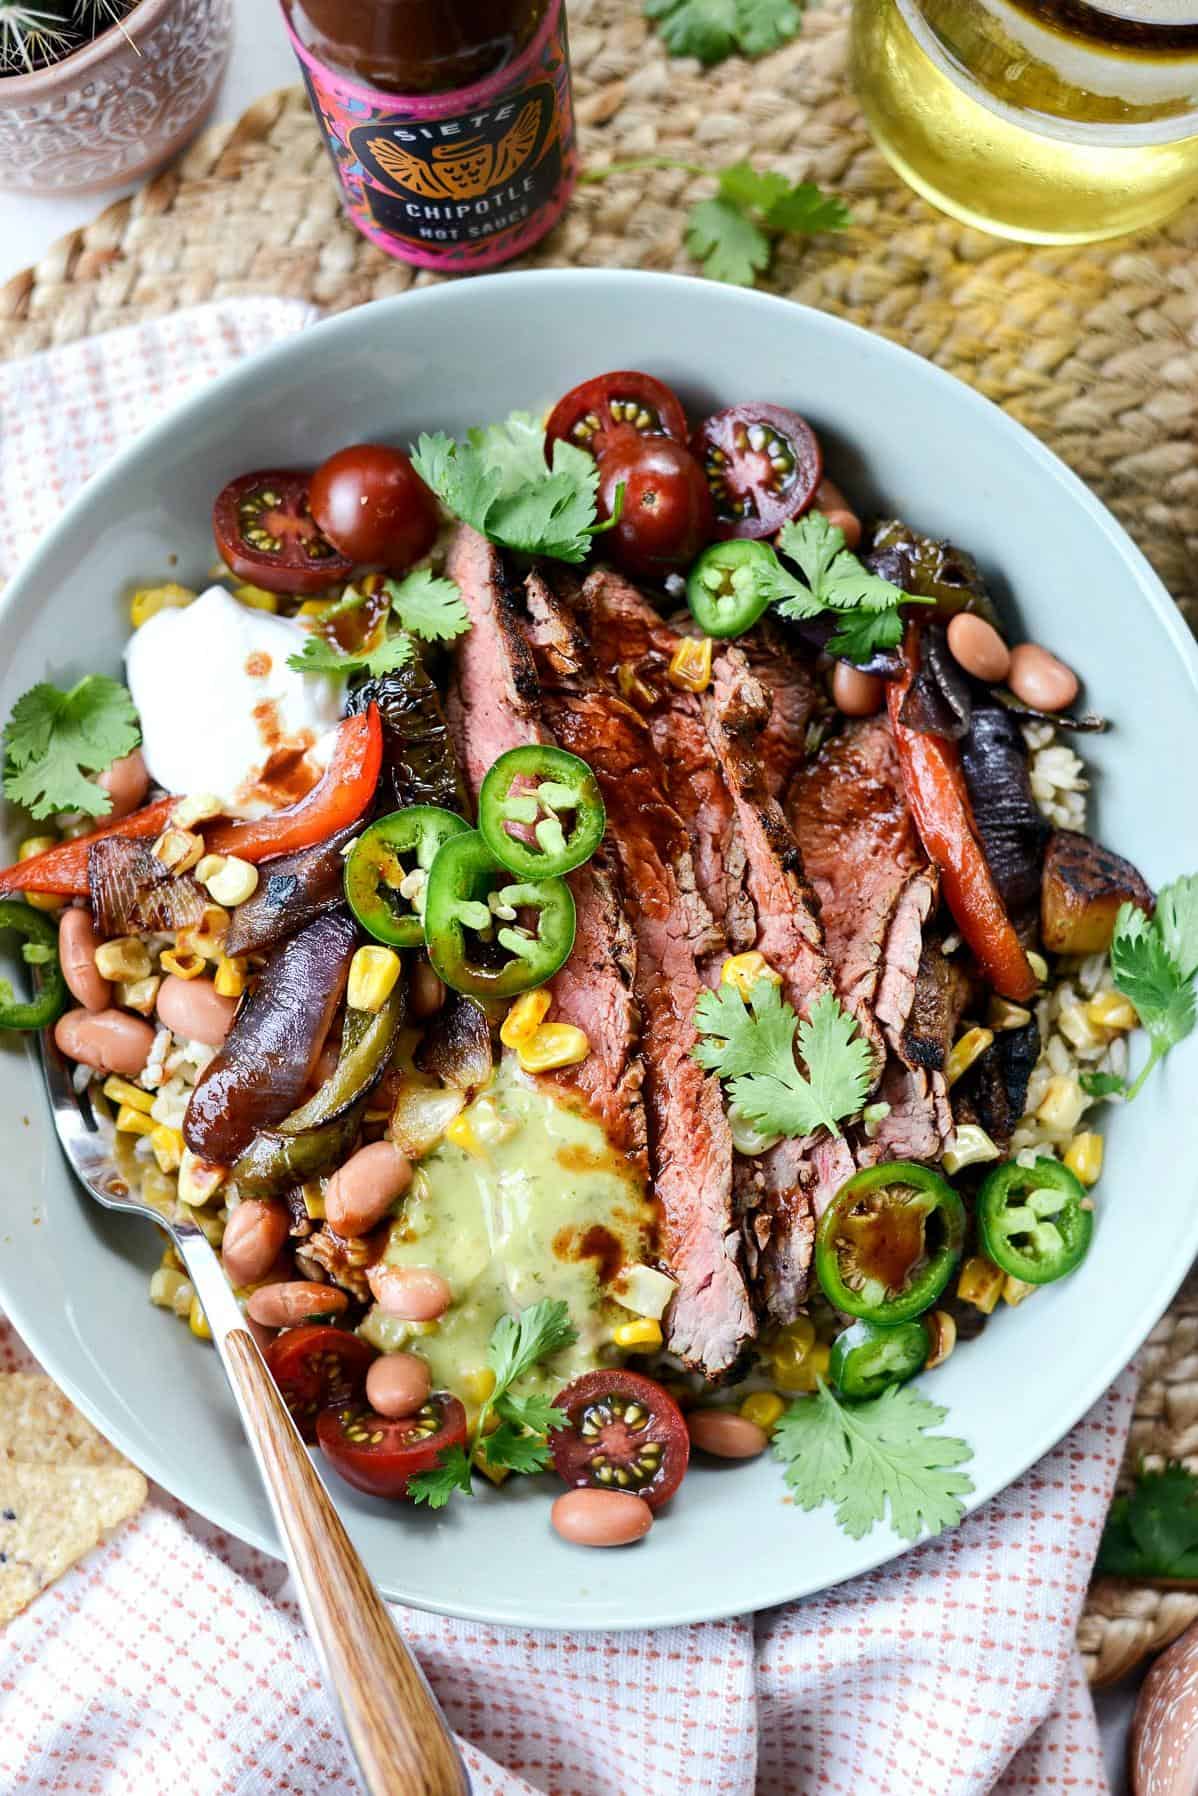  Sizzling hot and bursting with flavor – meet the Chipotle Steak Fajitas!